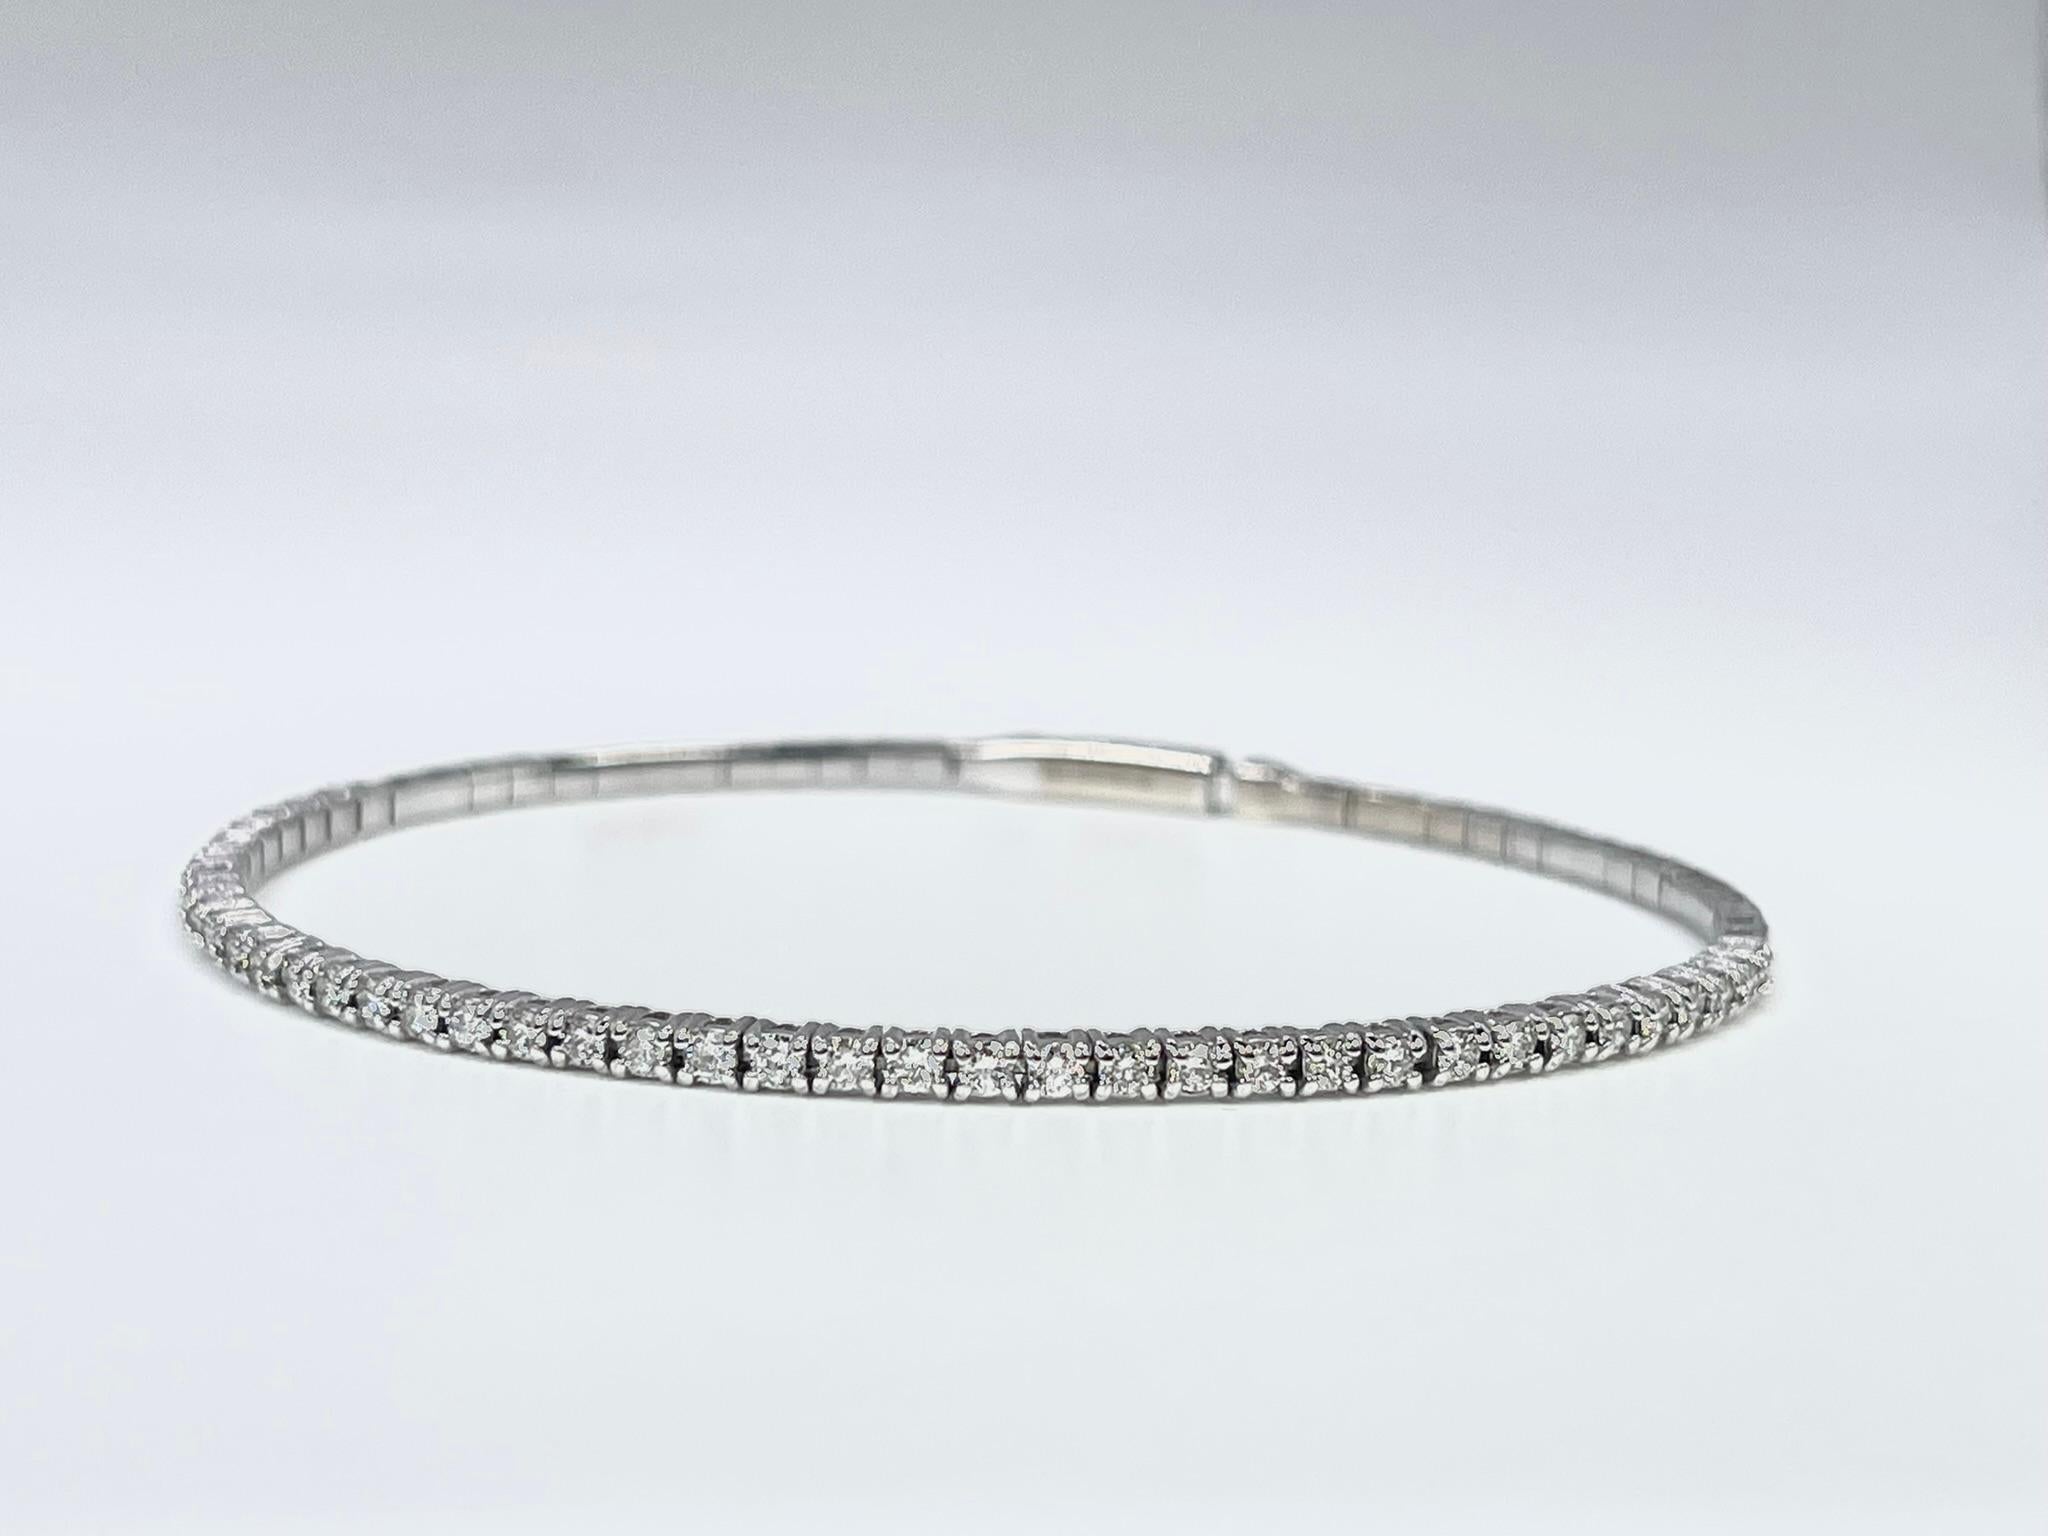 Diamond Bangle bracelet in 14KT white gold, the bangle bracelet is flexible and very comfortable when on the hand.

GRAM WEIGHT: 6.00gr
METAL: 14KT white gold

NATURAL DIAMOND(S)
Cut: Round Brilliant
Color: F-G 
Clarity: VS-SI 
Carat: 0.97ct
Length: